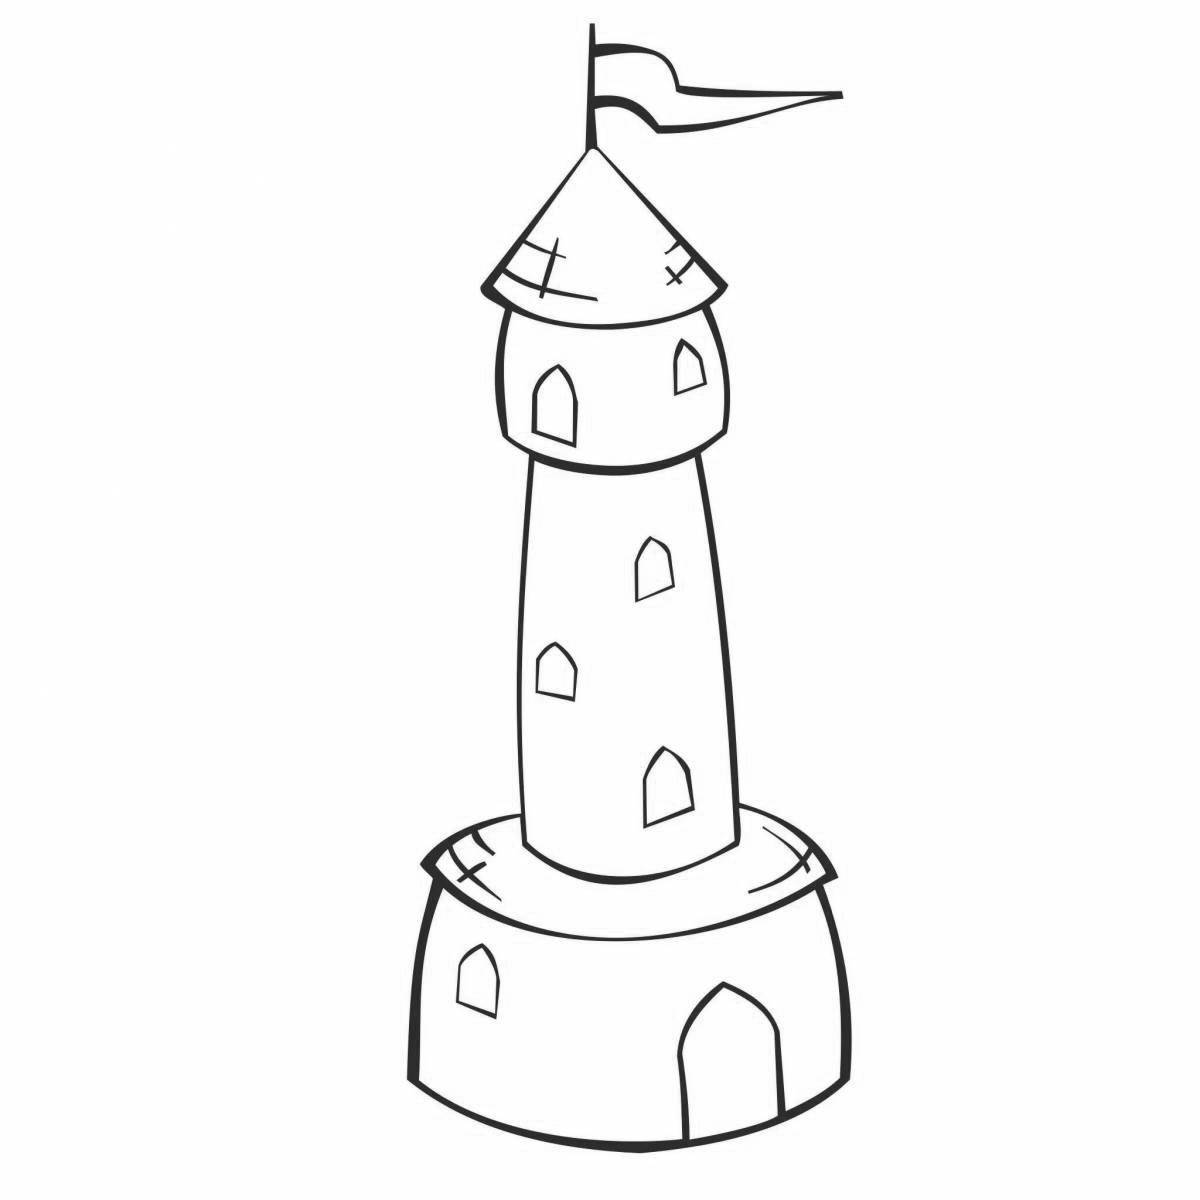 Gorgeous tower coloring book for kids